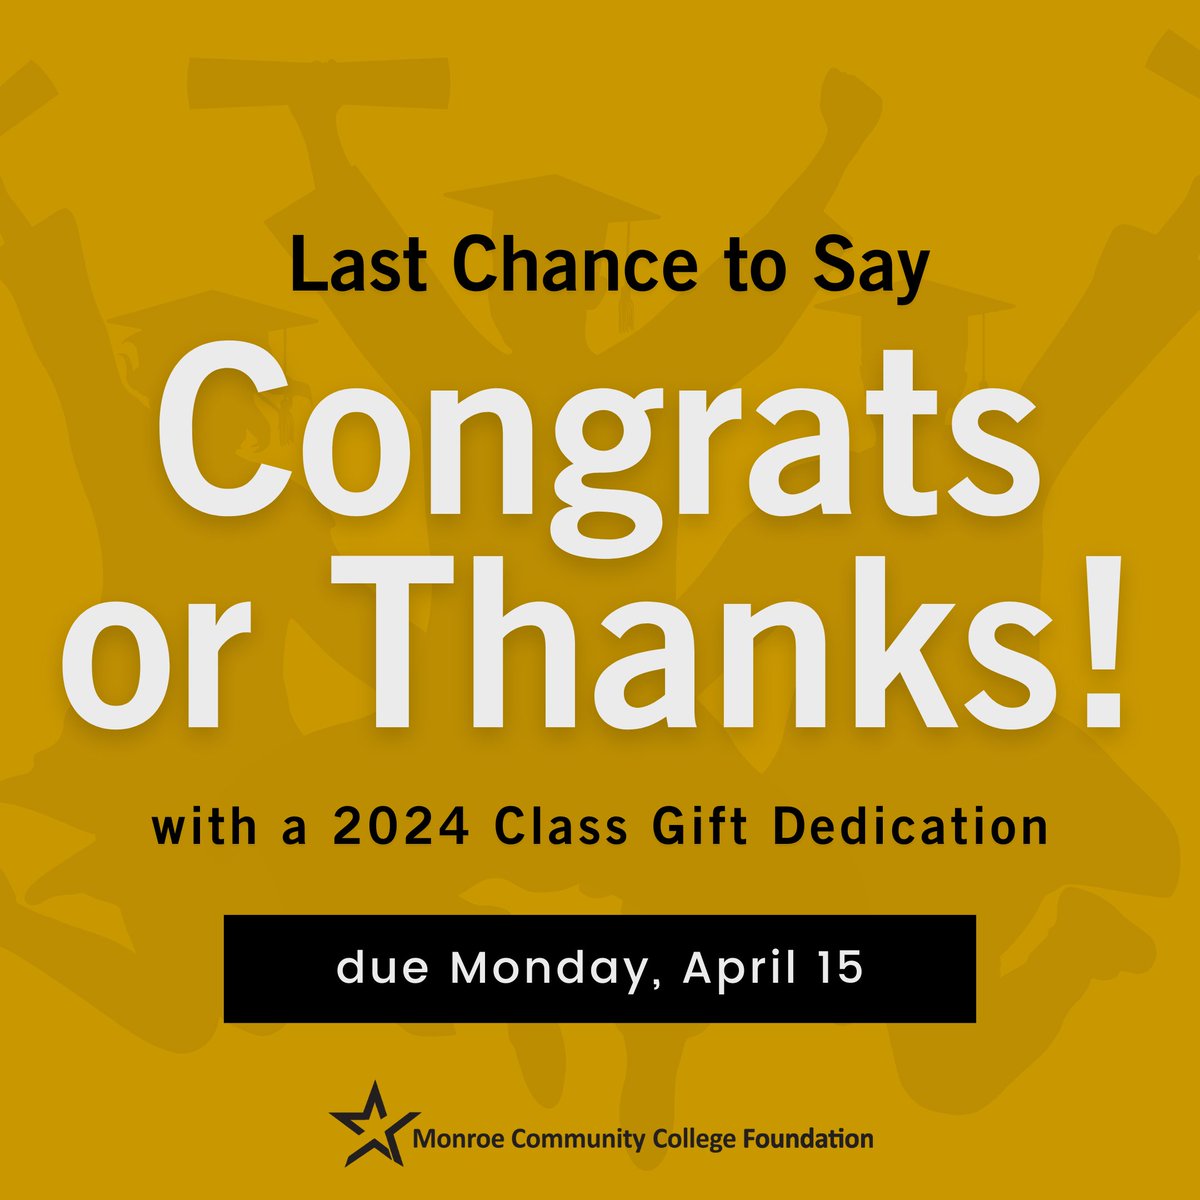 Today is the last day to submit class gift dedications! Don’t miss out on this opportunity to honor a @MonroeCC graduate or someone who has positively impacted your life with a tribute to be included in the 2024 MCC commencement program! ➡️bit.ly/3GkgSg0